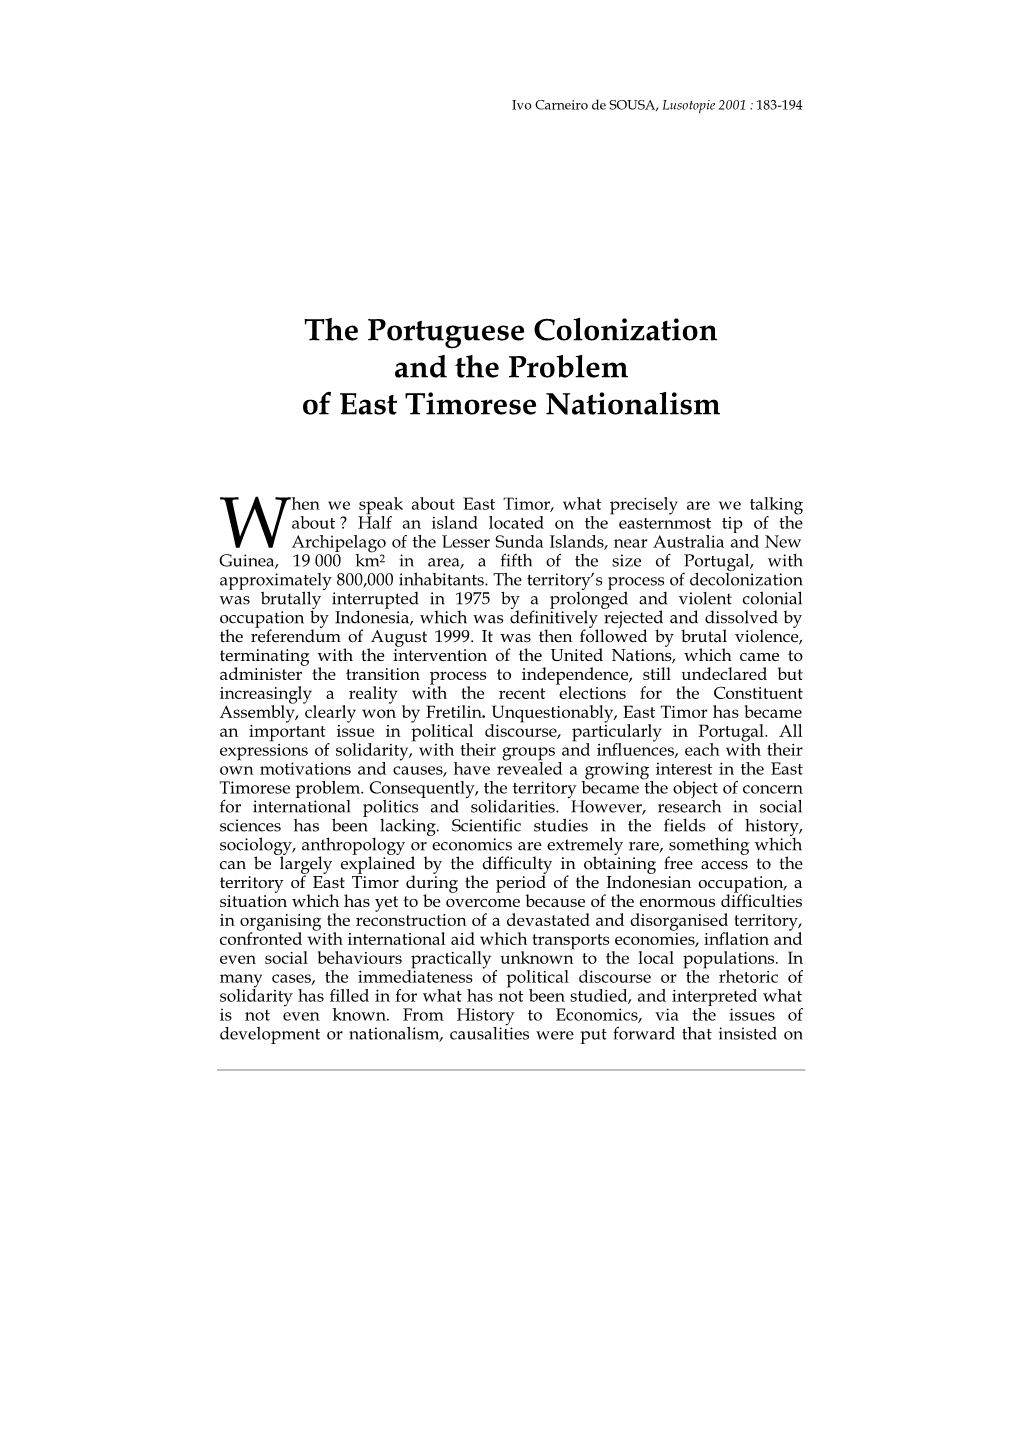 The Portuguese Colonization and the Problem of East Timorese Nationalism